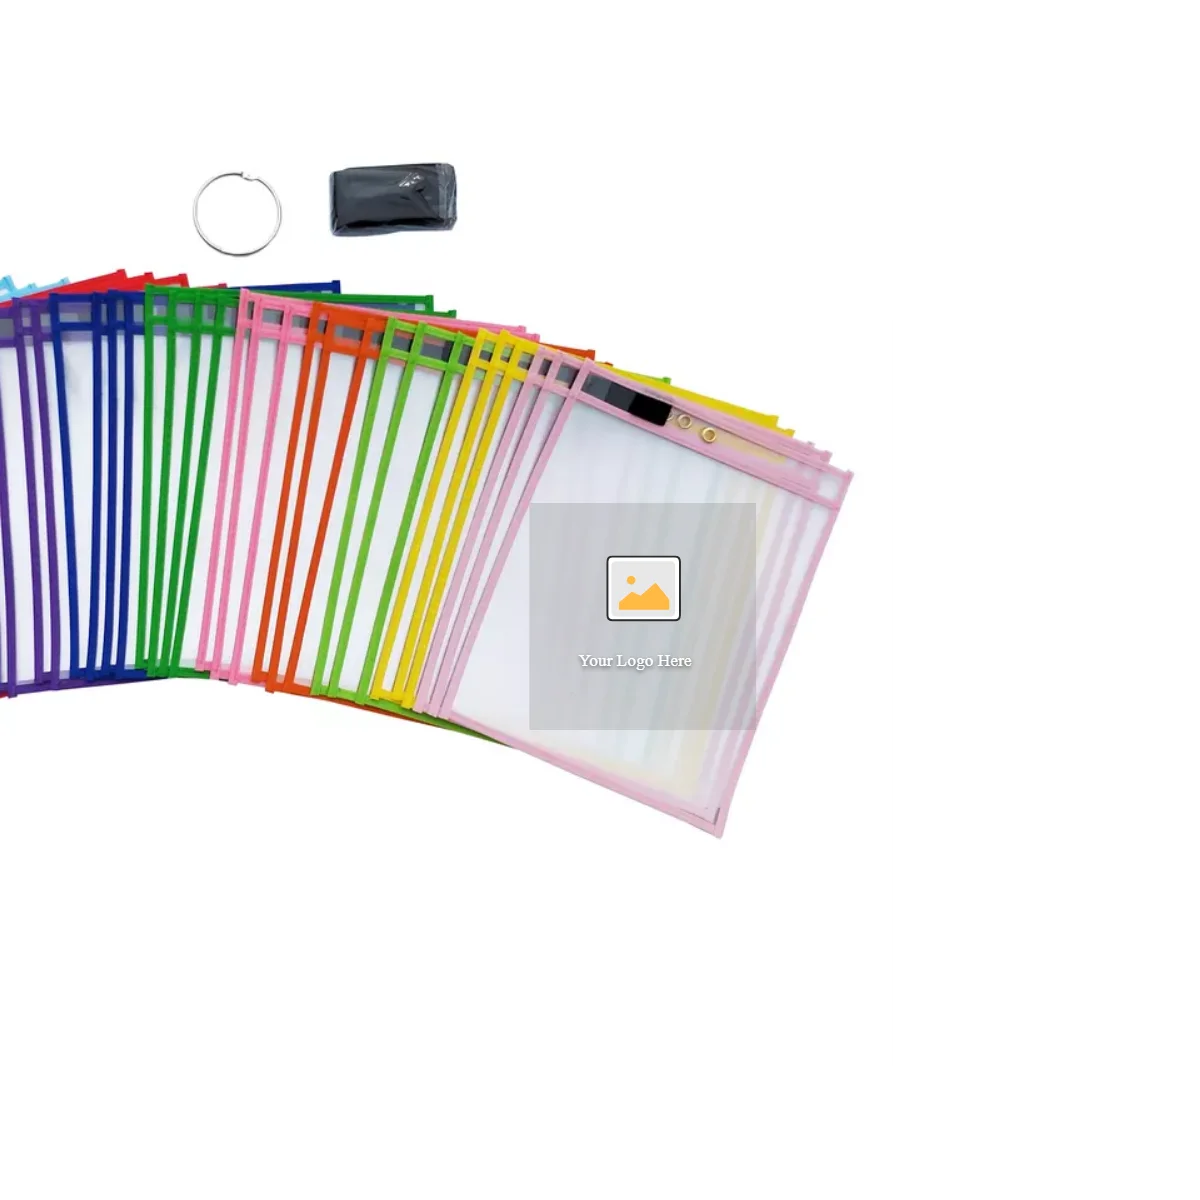 Reusable Dry Erase Pockets Assorted Color Teaching Supplies Dry Erase Pockets Worksheet Sleeves Oversize 10 x 13 Perfect for Classroom Organization 10 Pack